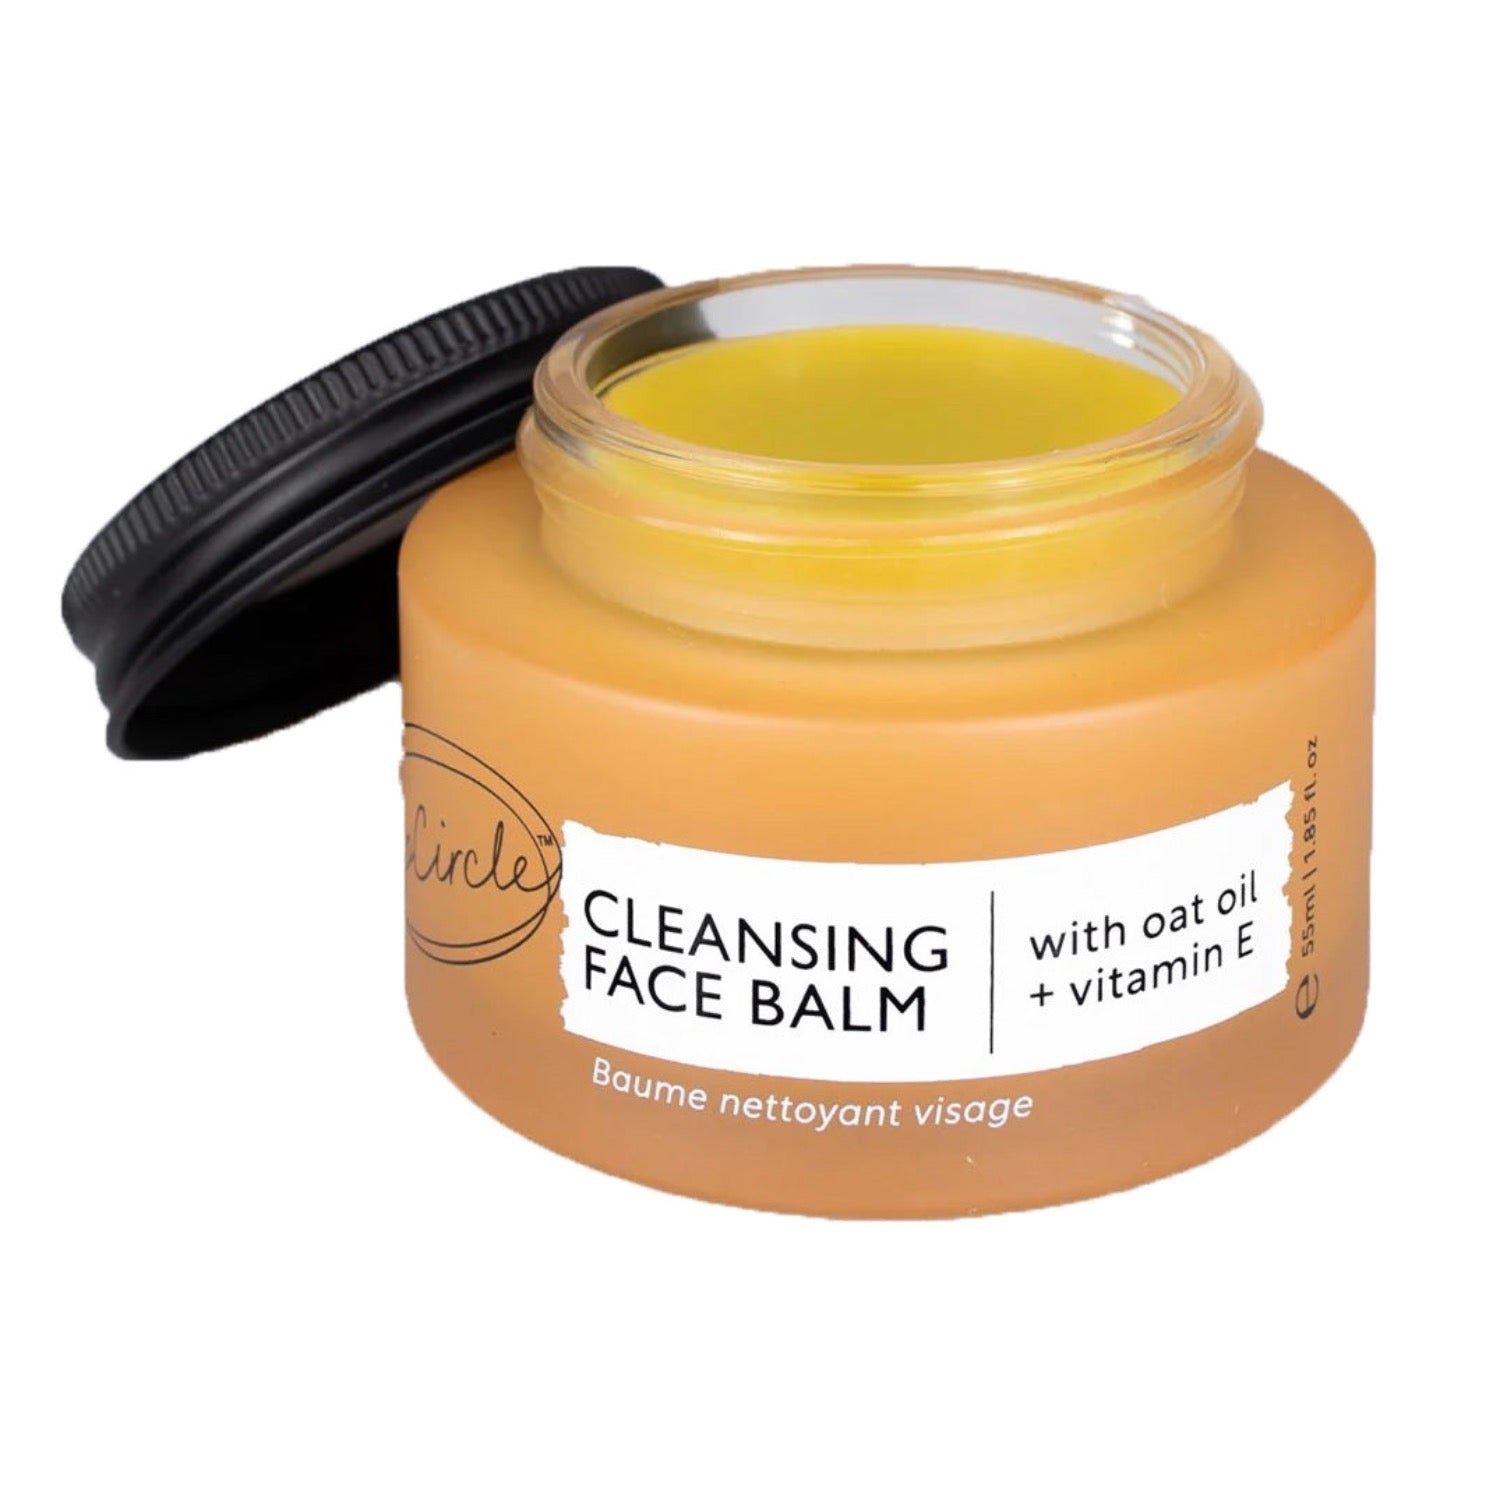 UpCircle Cleansing Face Balm with Oat Oil & Vitamin E suitable for all skin types, the balm is crafted with 100% natural ingredients.